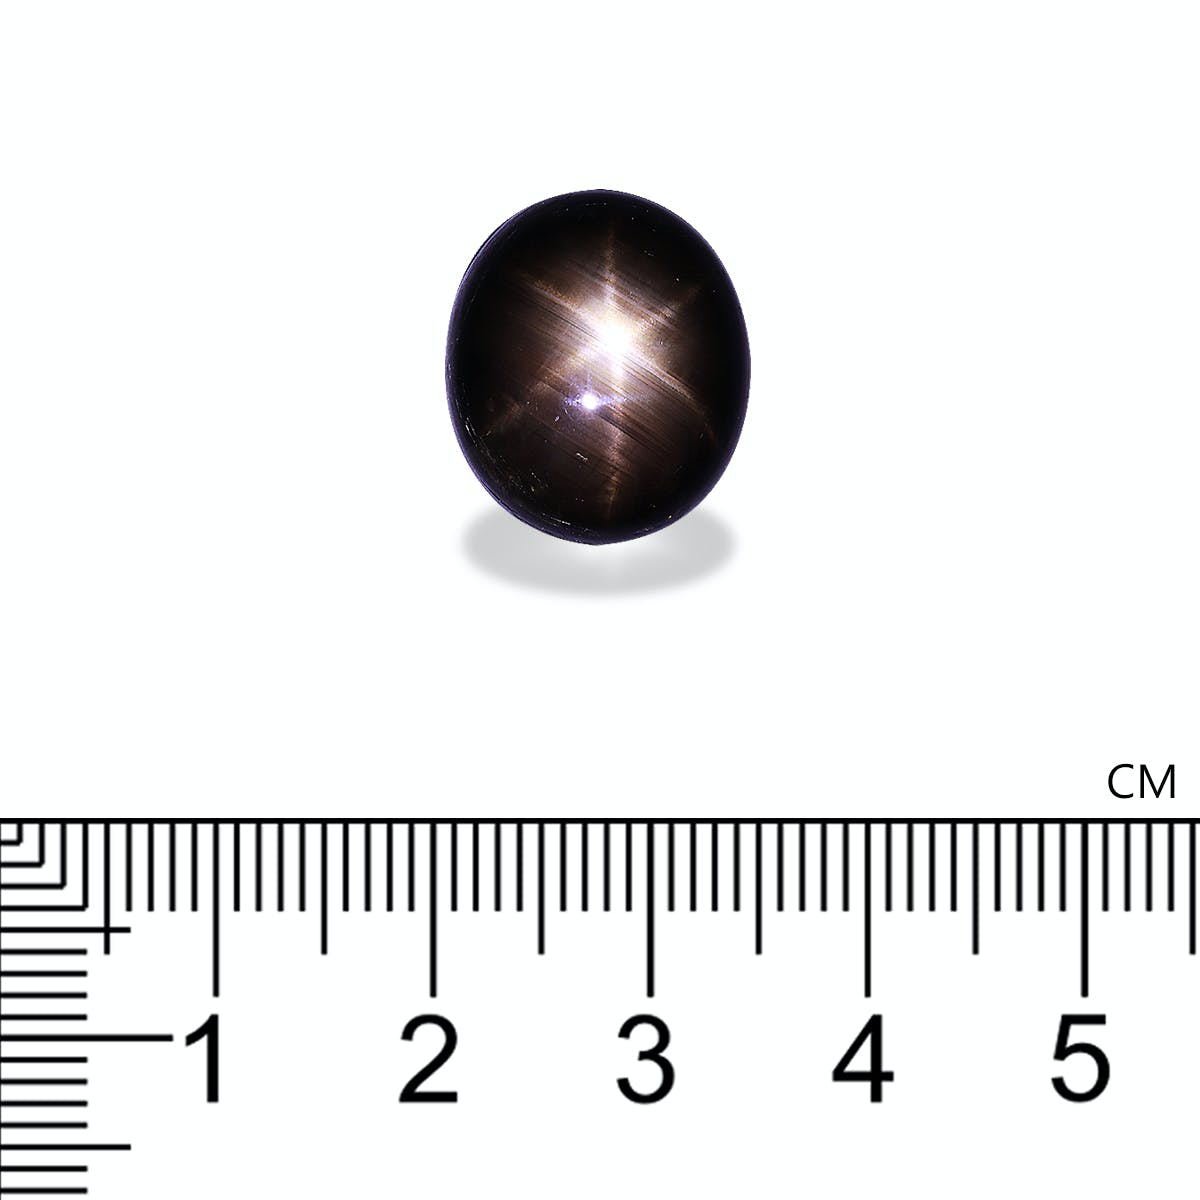 Picture of Black Star Sapphire 26.11ct - 16x14mm (BL0047)